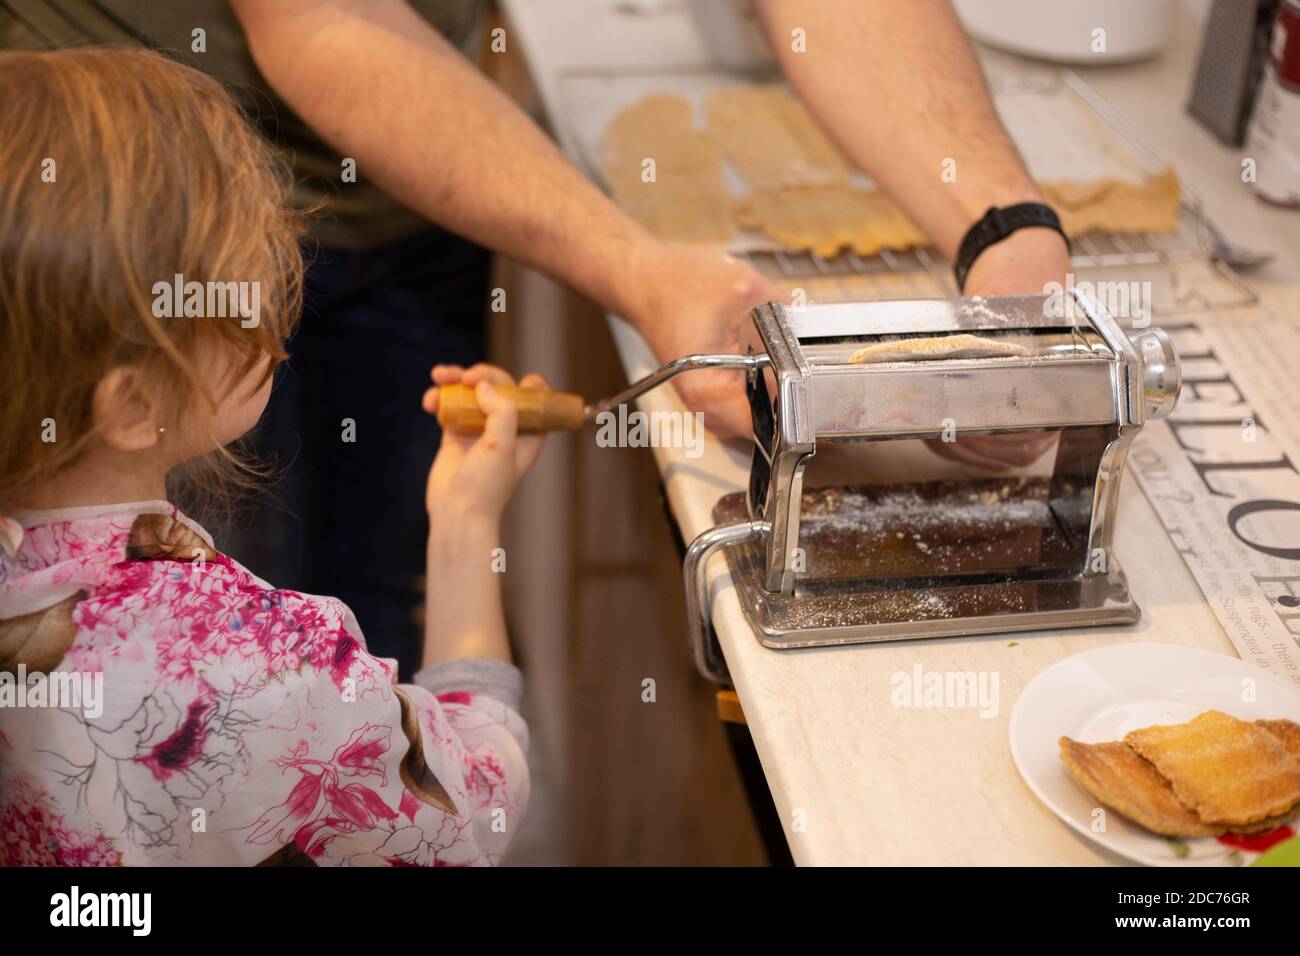 Daughter and father baking together Stock Photo